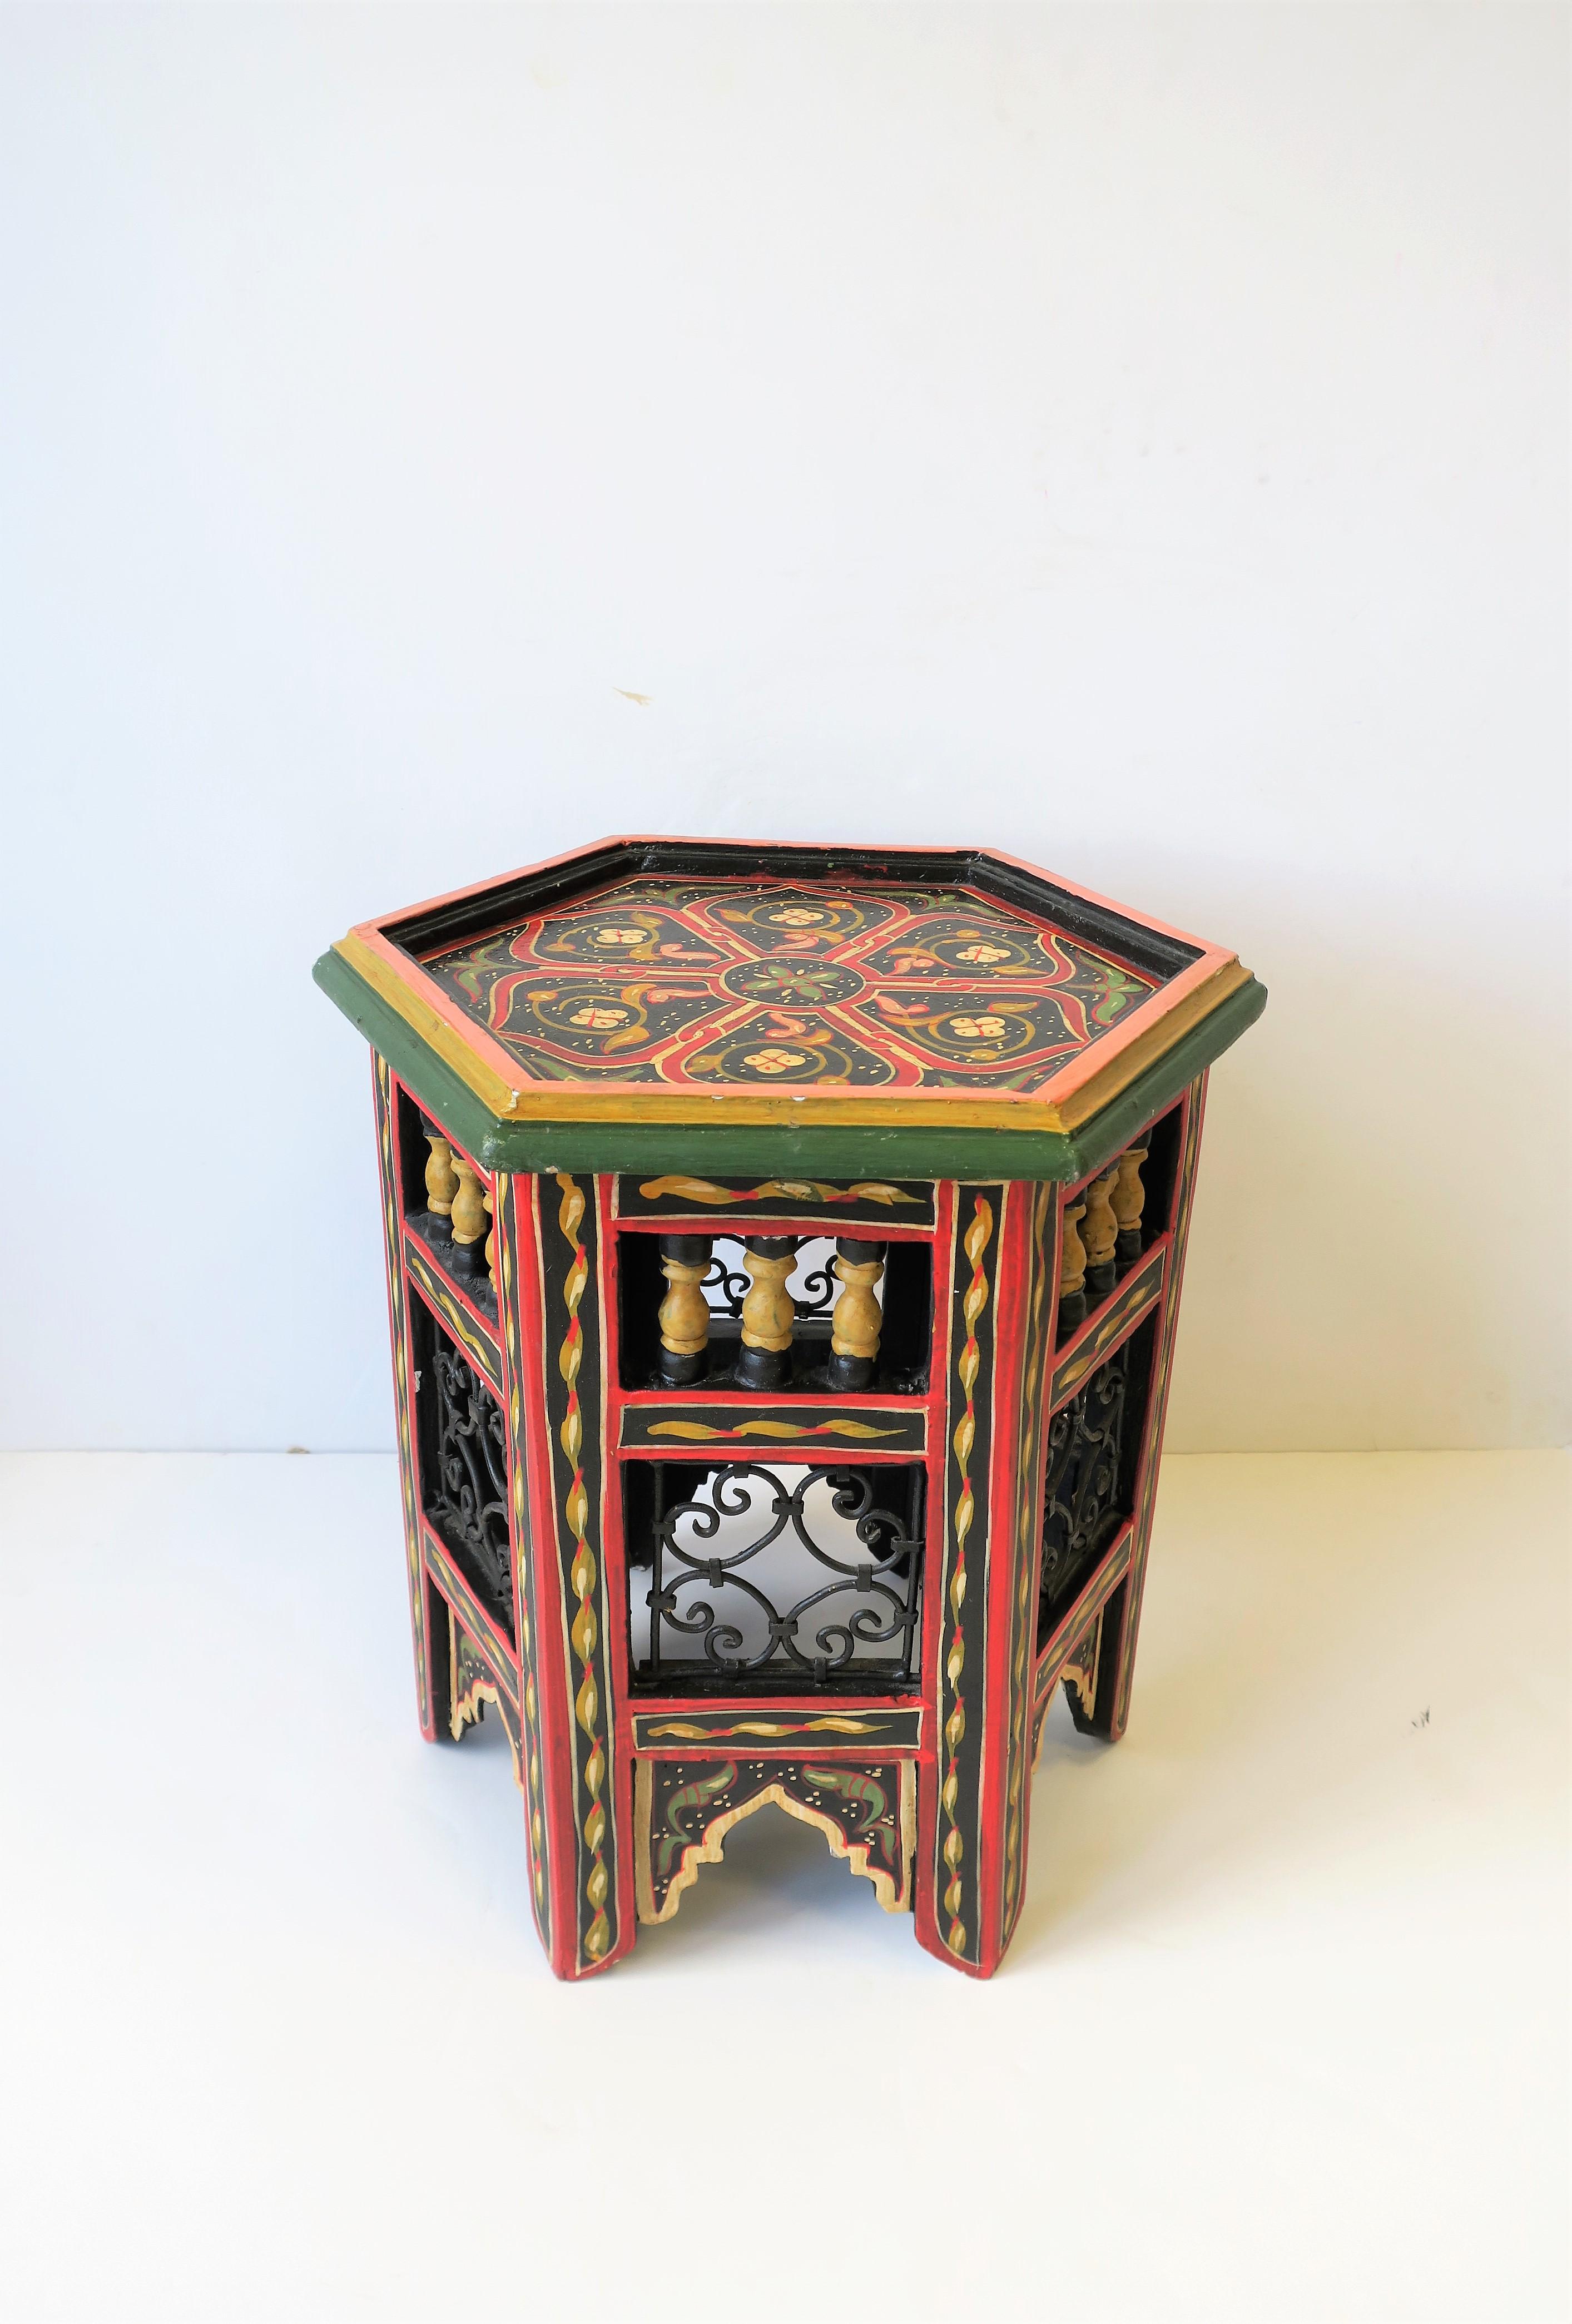 A small colorful Moorish or Moroccan tabouret side or drinks table with a hexagon top, decorative design, and black metal on sides, circa mid-20th century. The carnation pink, dark yellow, and green grass colors around edge of hexagon top make a